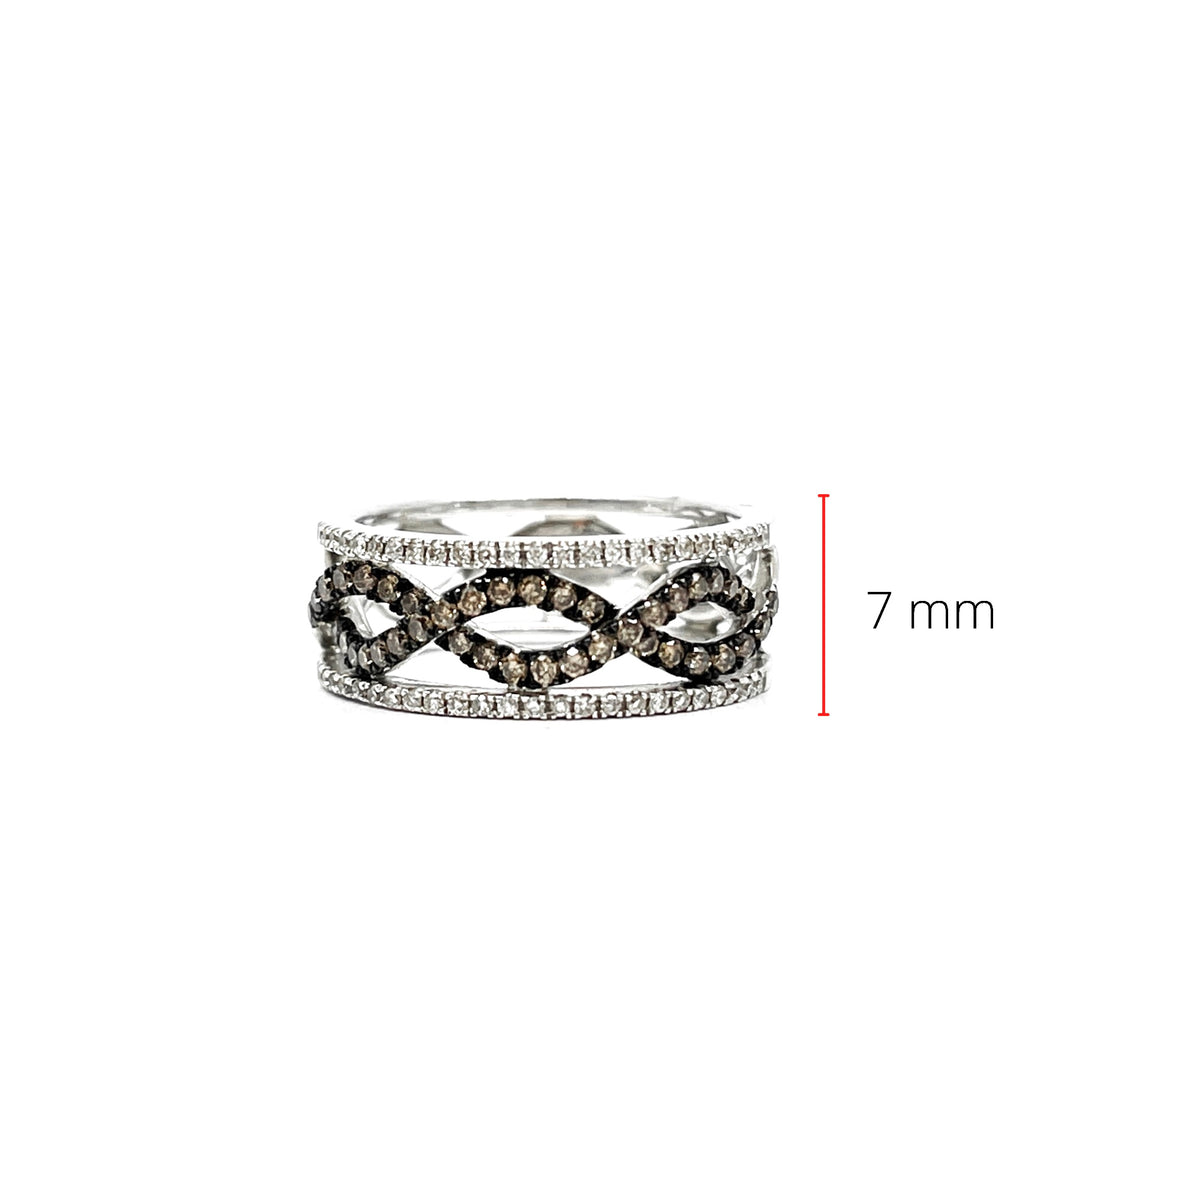 14K White Gold 0.51cttw Champagne and White Diamond Ring - size 6.5